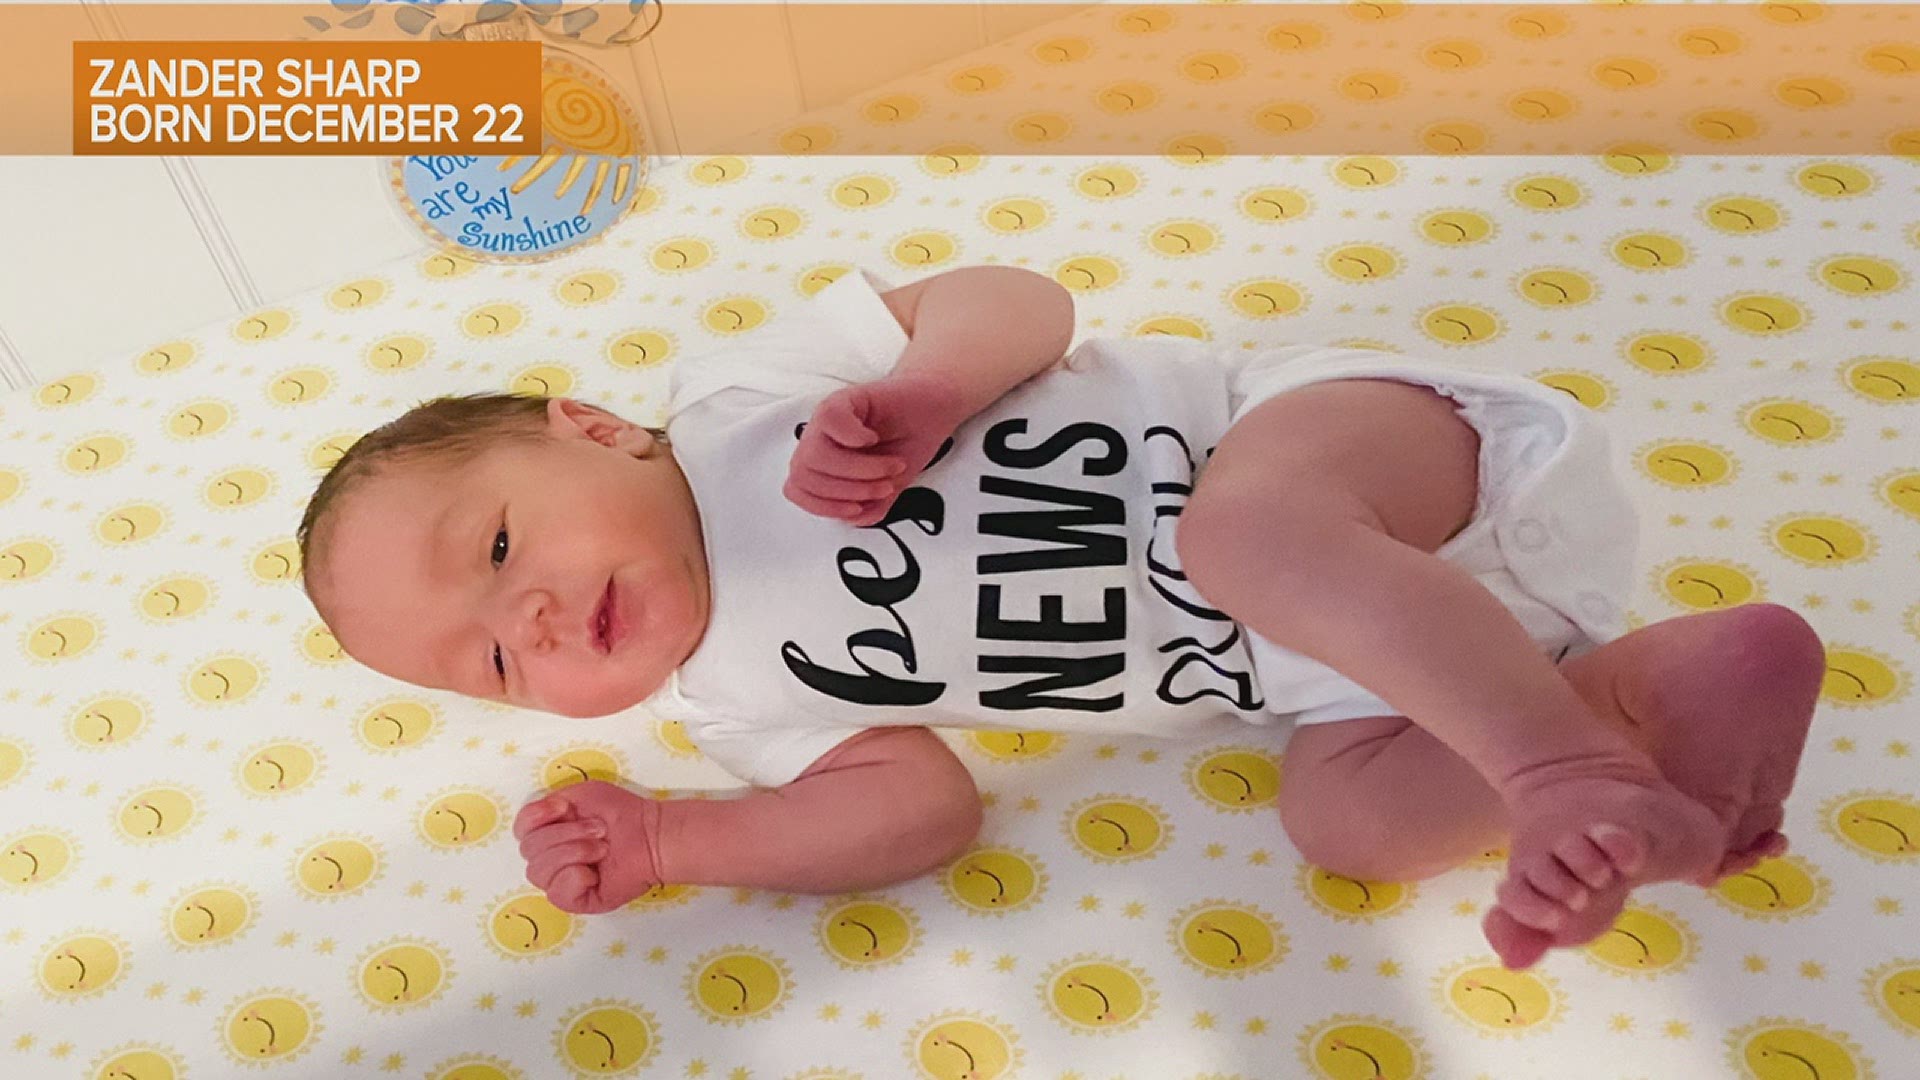 News 8's Angie Sharp and husband Zach welcome their son to the WQAD News 8 Family!